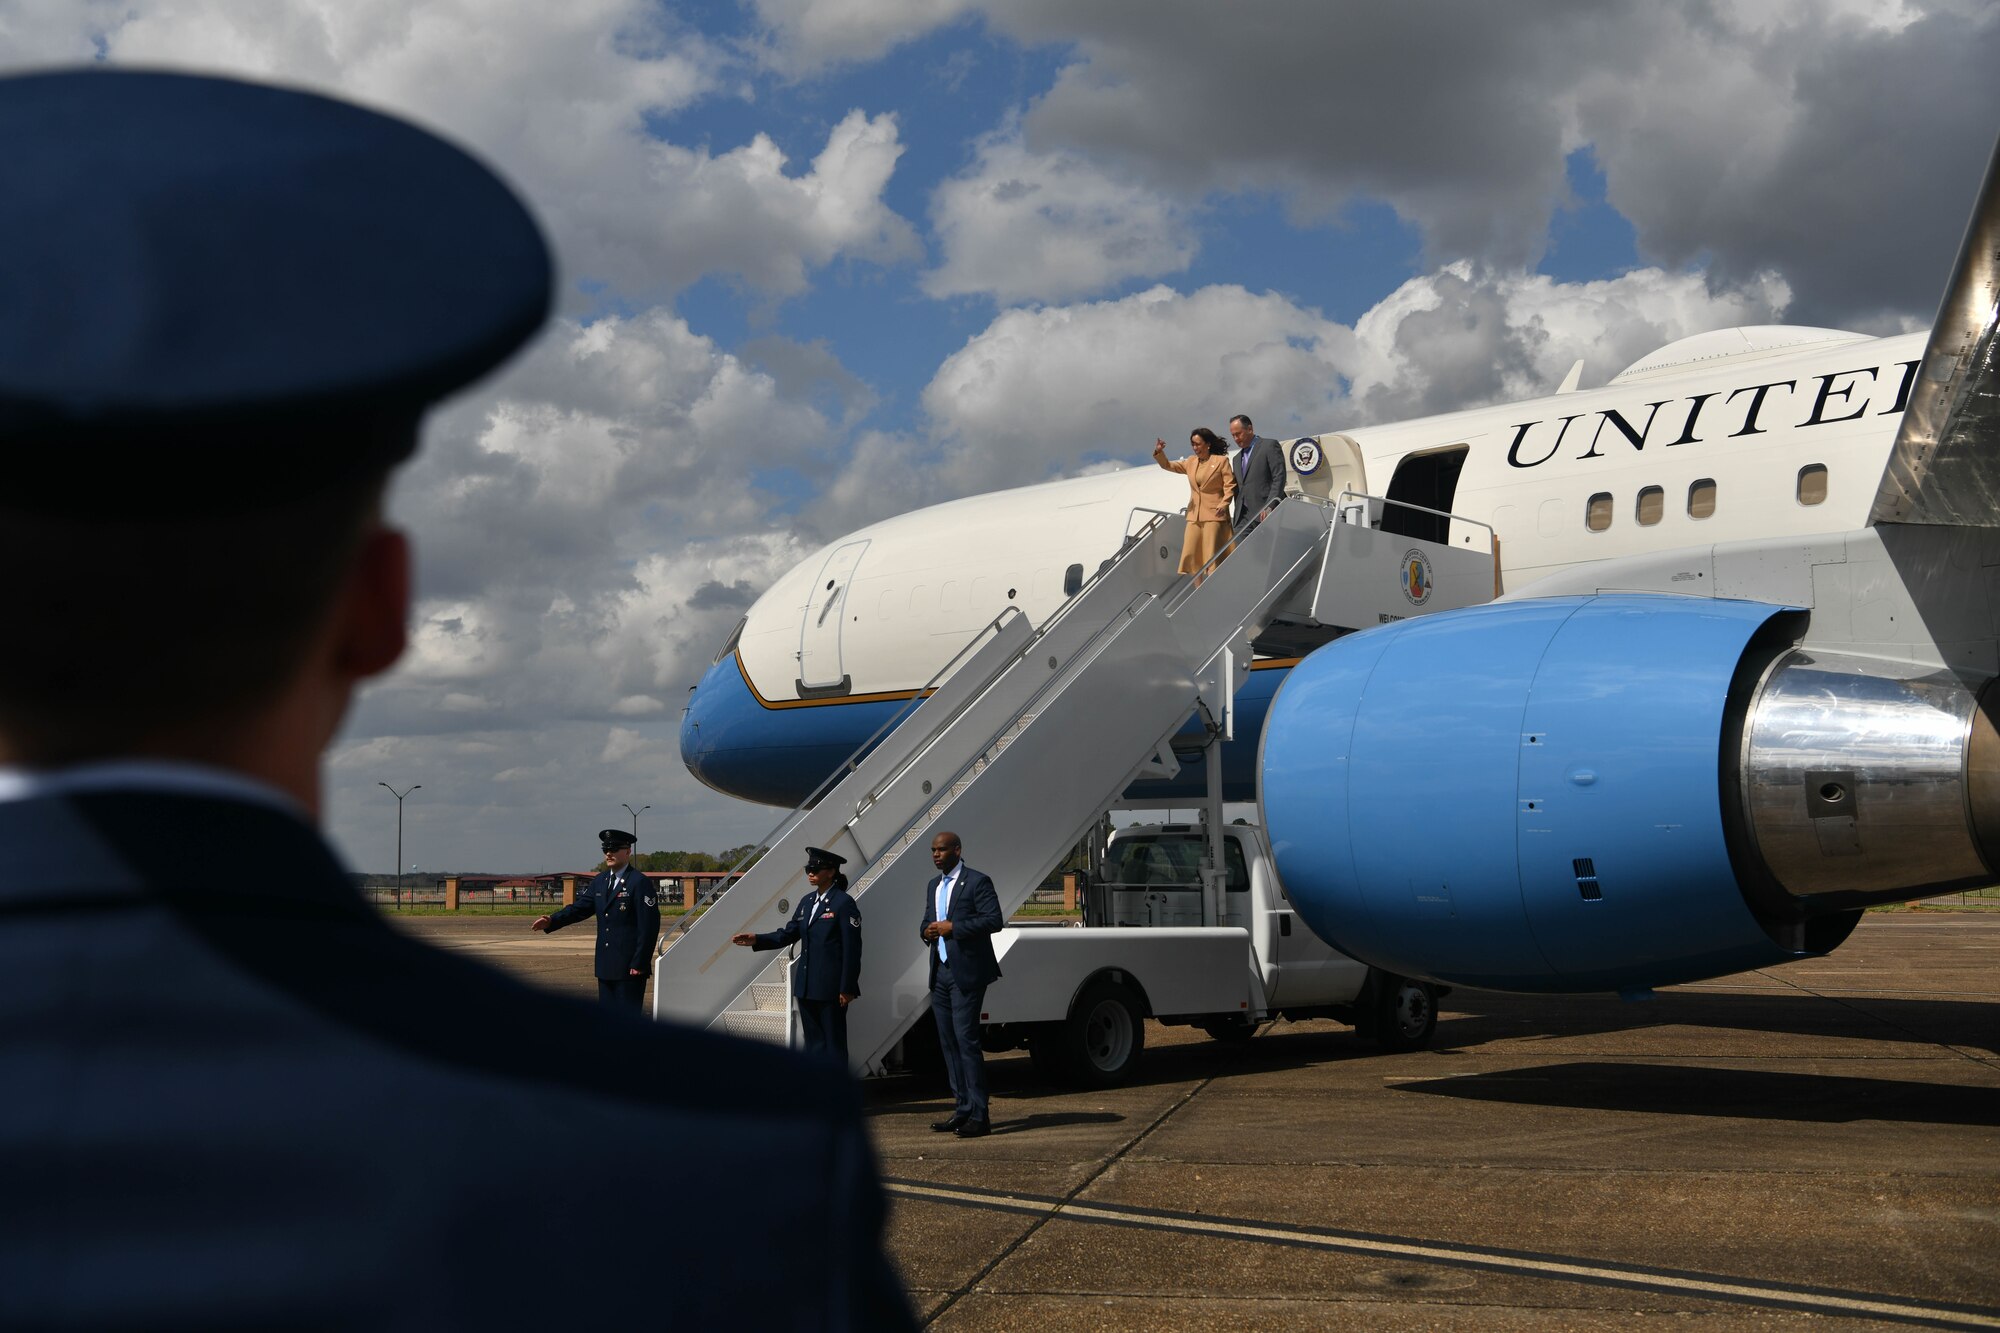 Vice President Kamala Harris exits Air Force Two after arriving on Maxwell Air Force Base, Alabama March 6, 2022. Harris visited Alabama to commemorate the 57th anniversary of Bloody Sunday, a civil rights march that turned to tragedy. (U.S. Air Force photo by Senior Airman Jackson Manske)